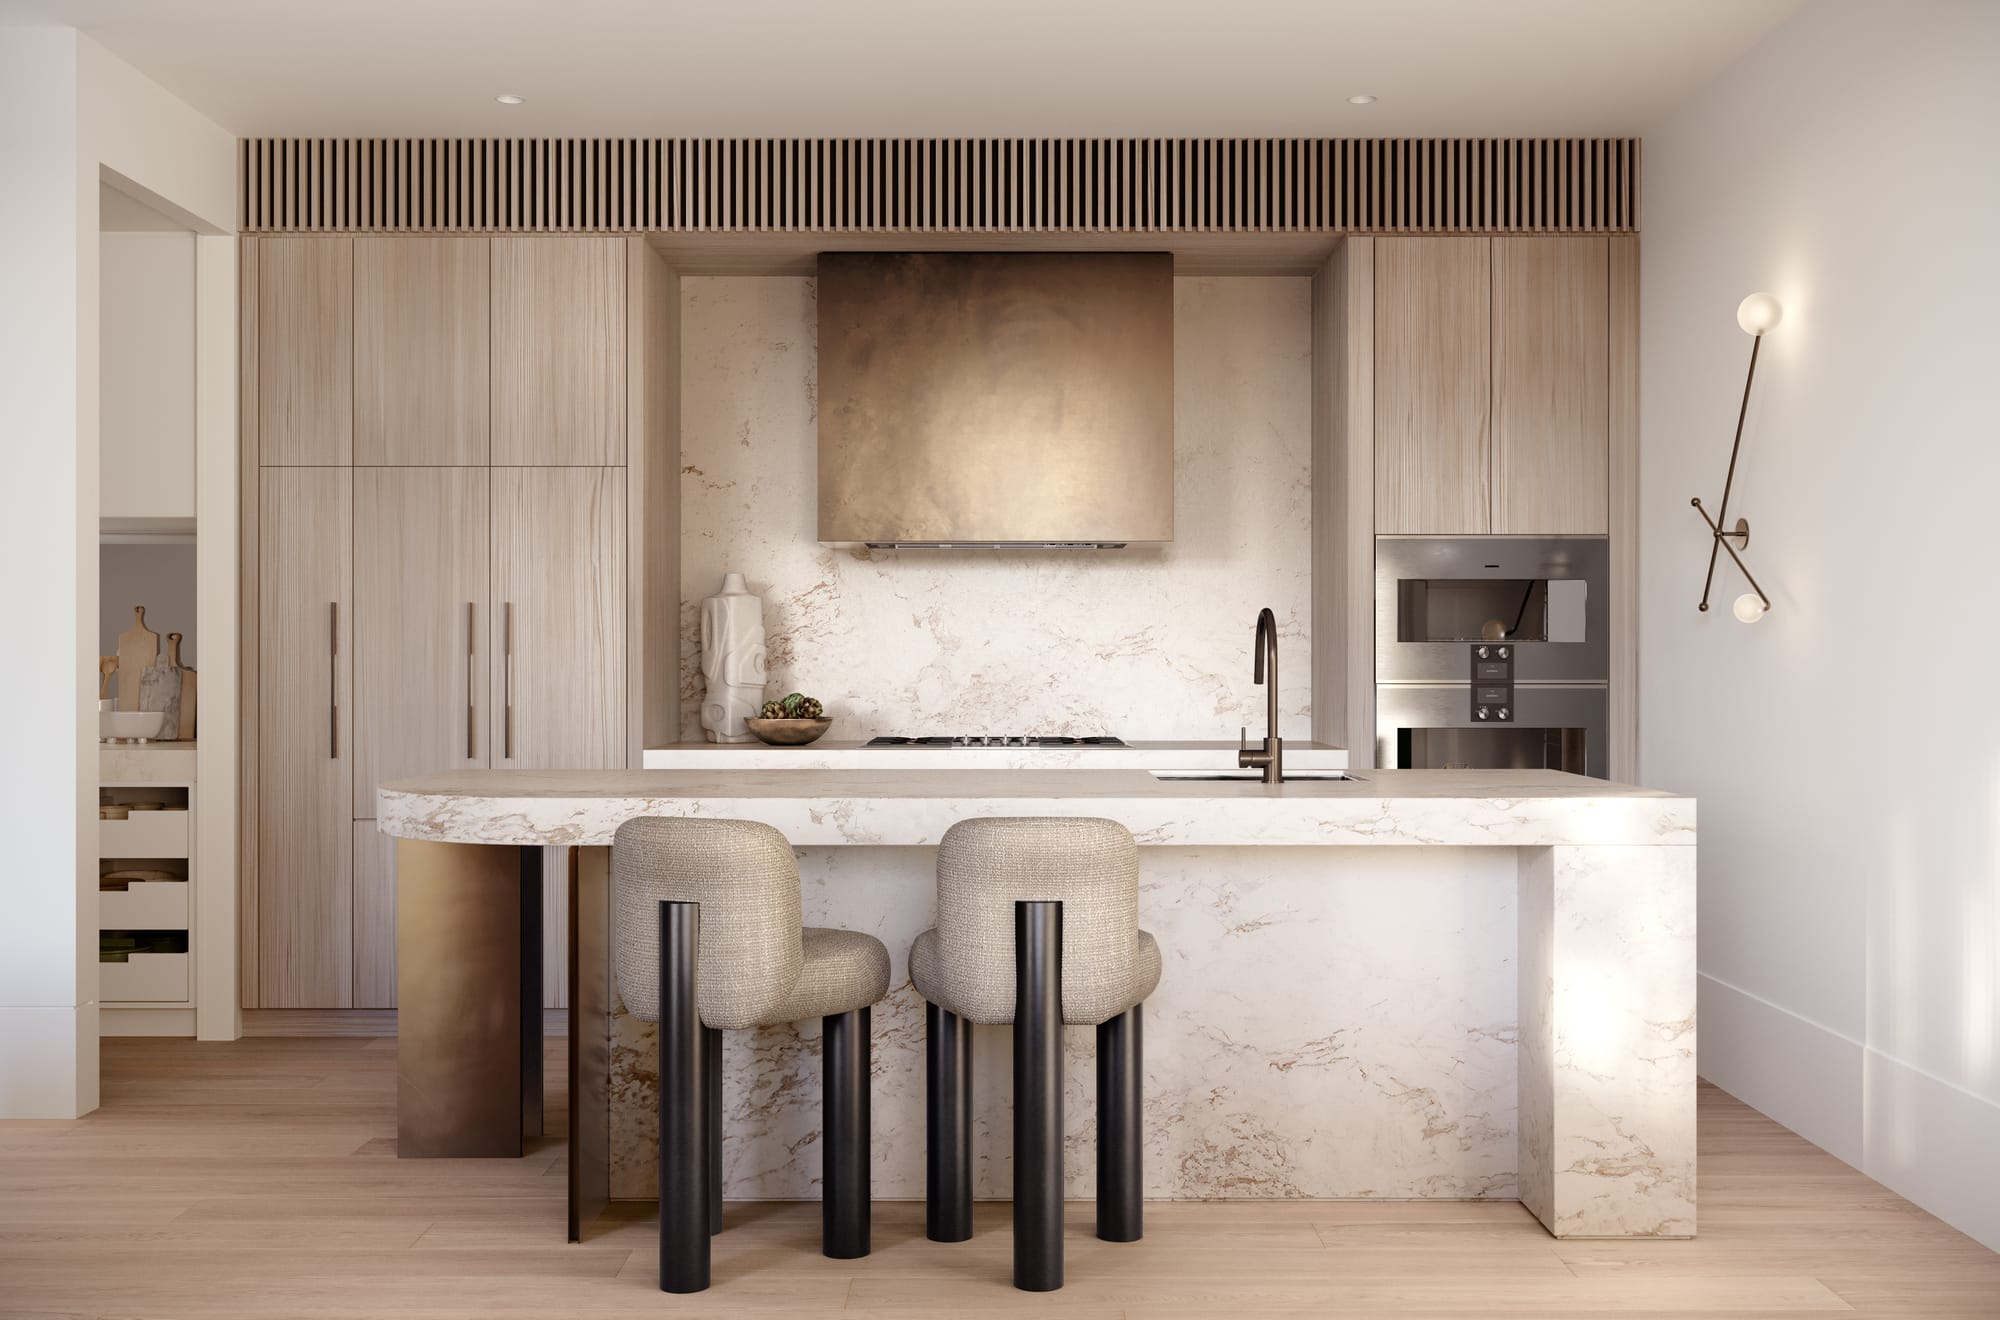 Sculpt Hawthorn by Mim Design, Parallel Workshop and Jack Merlo. Render copyright of Studio Piper. Kitchen with stone island bench and splashback. Brass accents and timber cabinetry. Timber floors. White and black bar stools. 